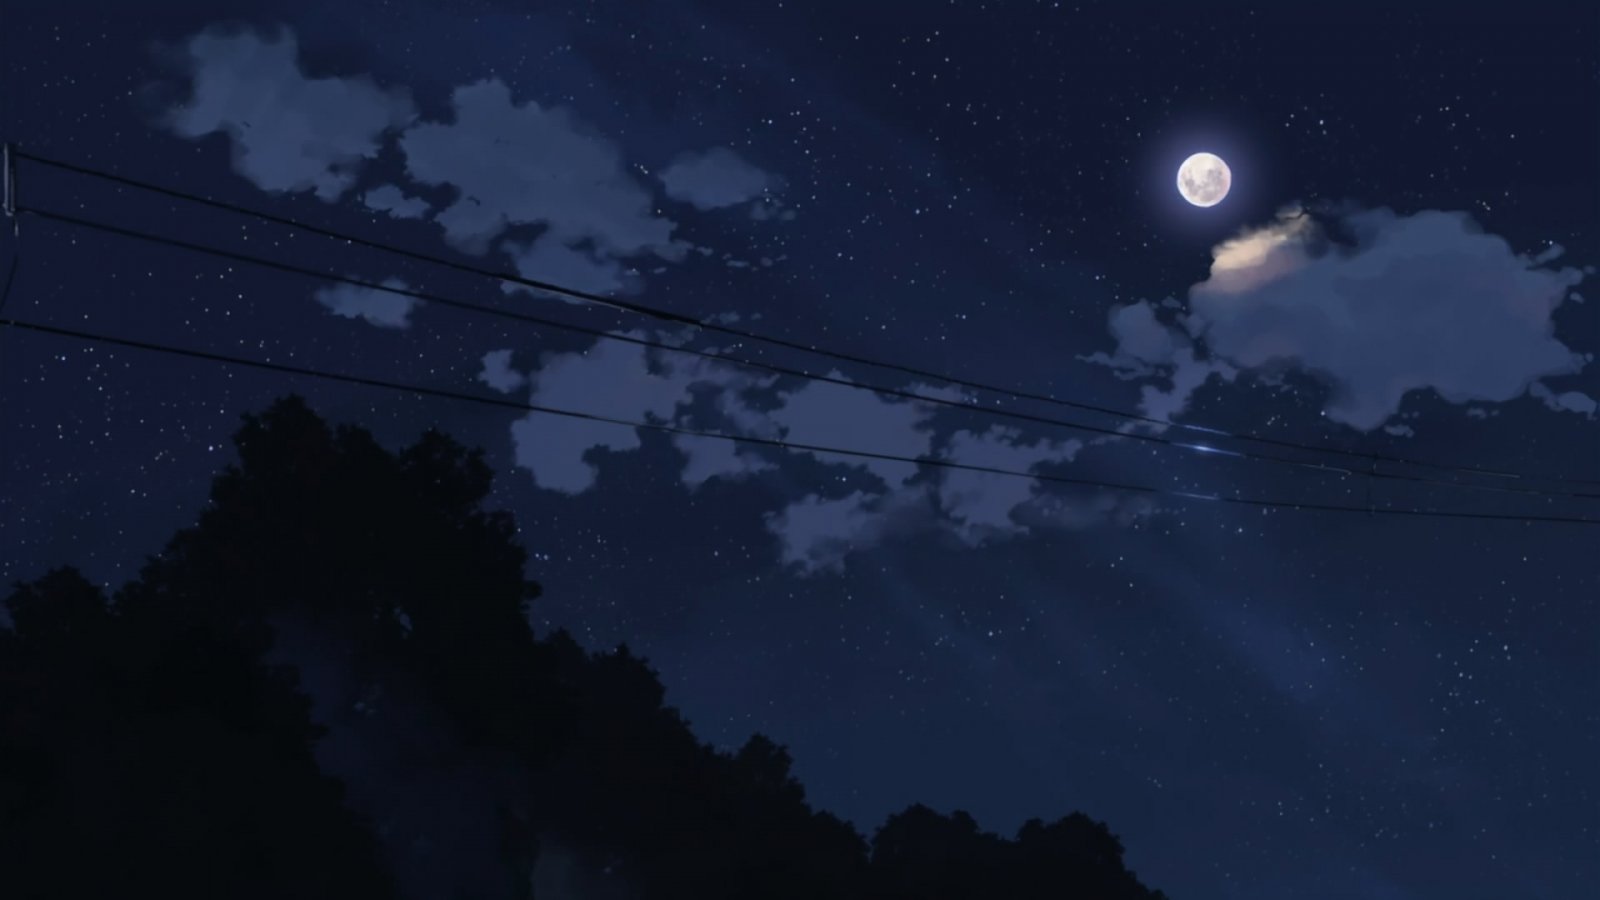 Free download Download Anime Night Sky Wallpaper 5776 1920x1080 px High [1920x1080] for your Desktop, Mobile & Tablet. Explore Night Sky Wallpaper. Starry Night Wallpaper, Night Sky Wallpaper HD, Starry Sky Wallpaper